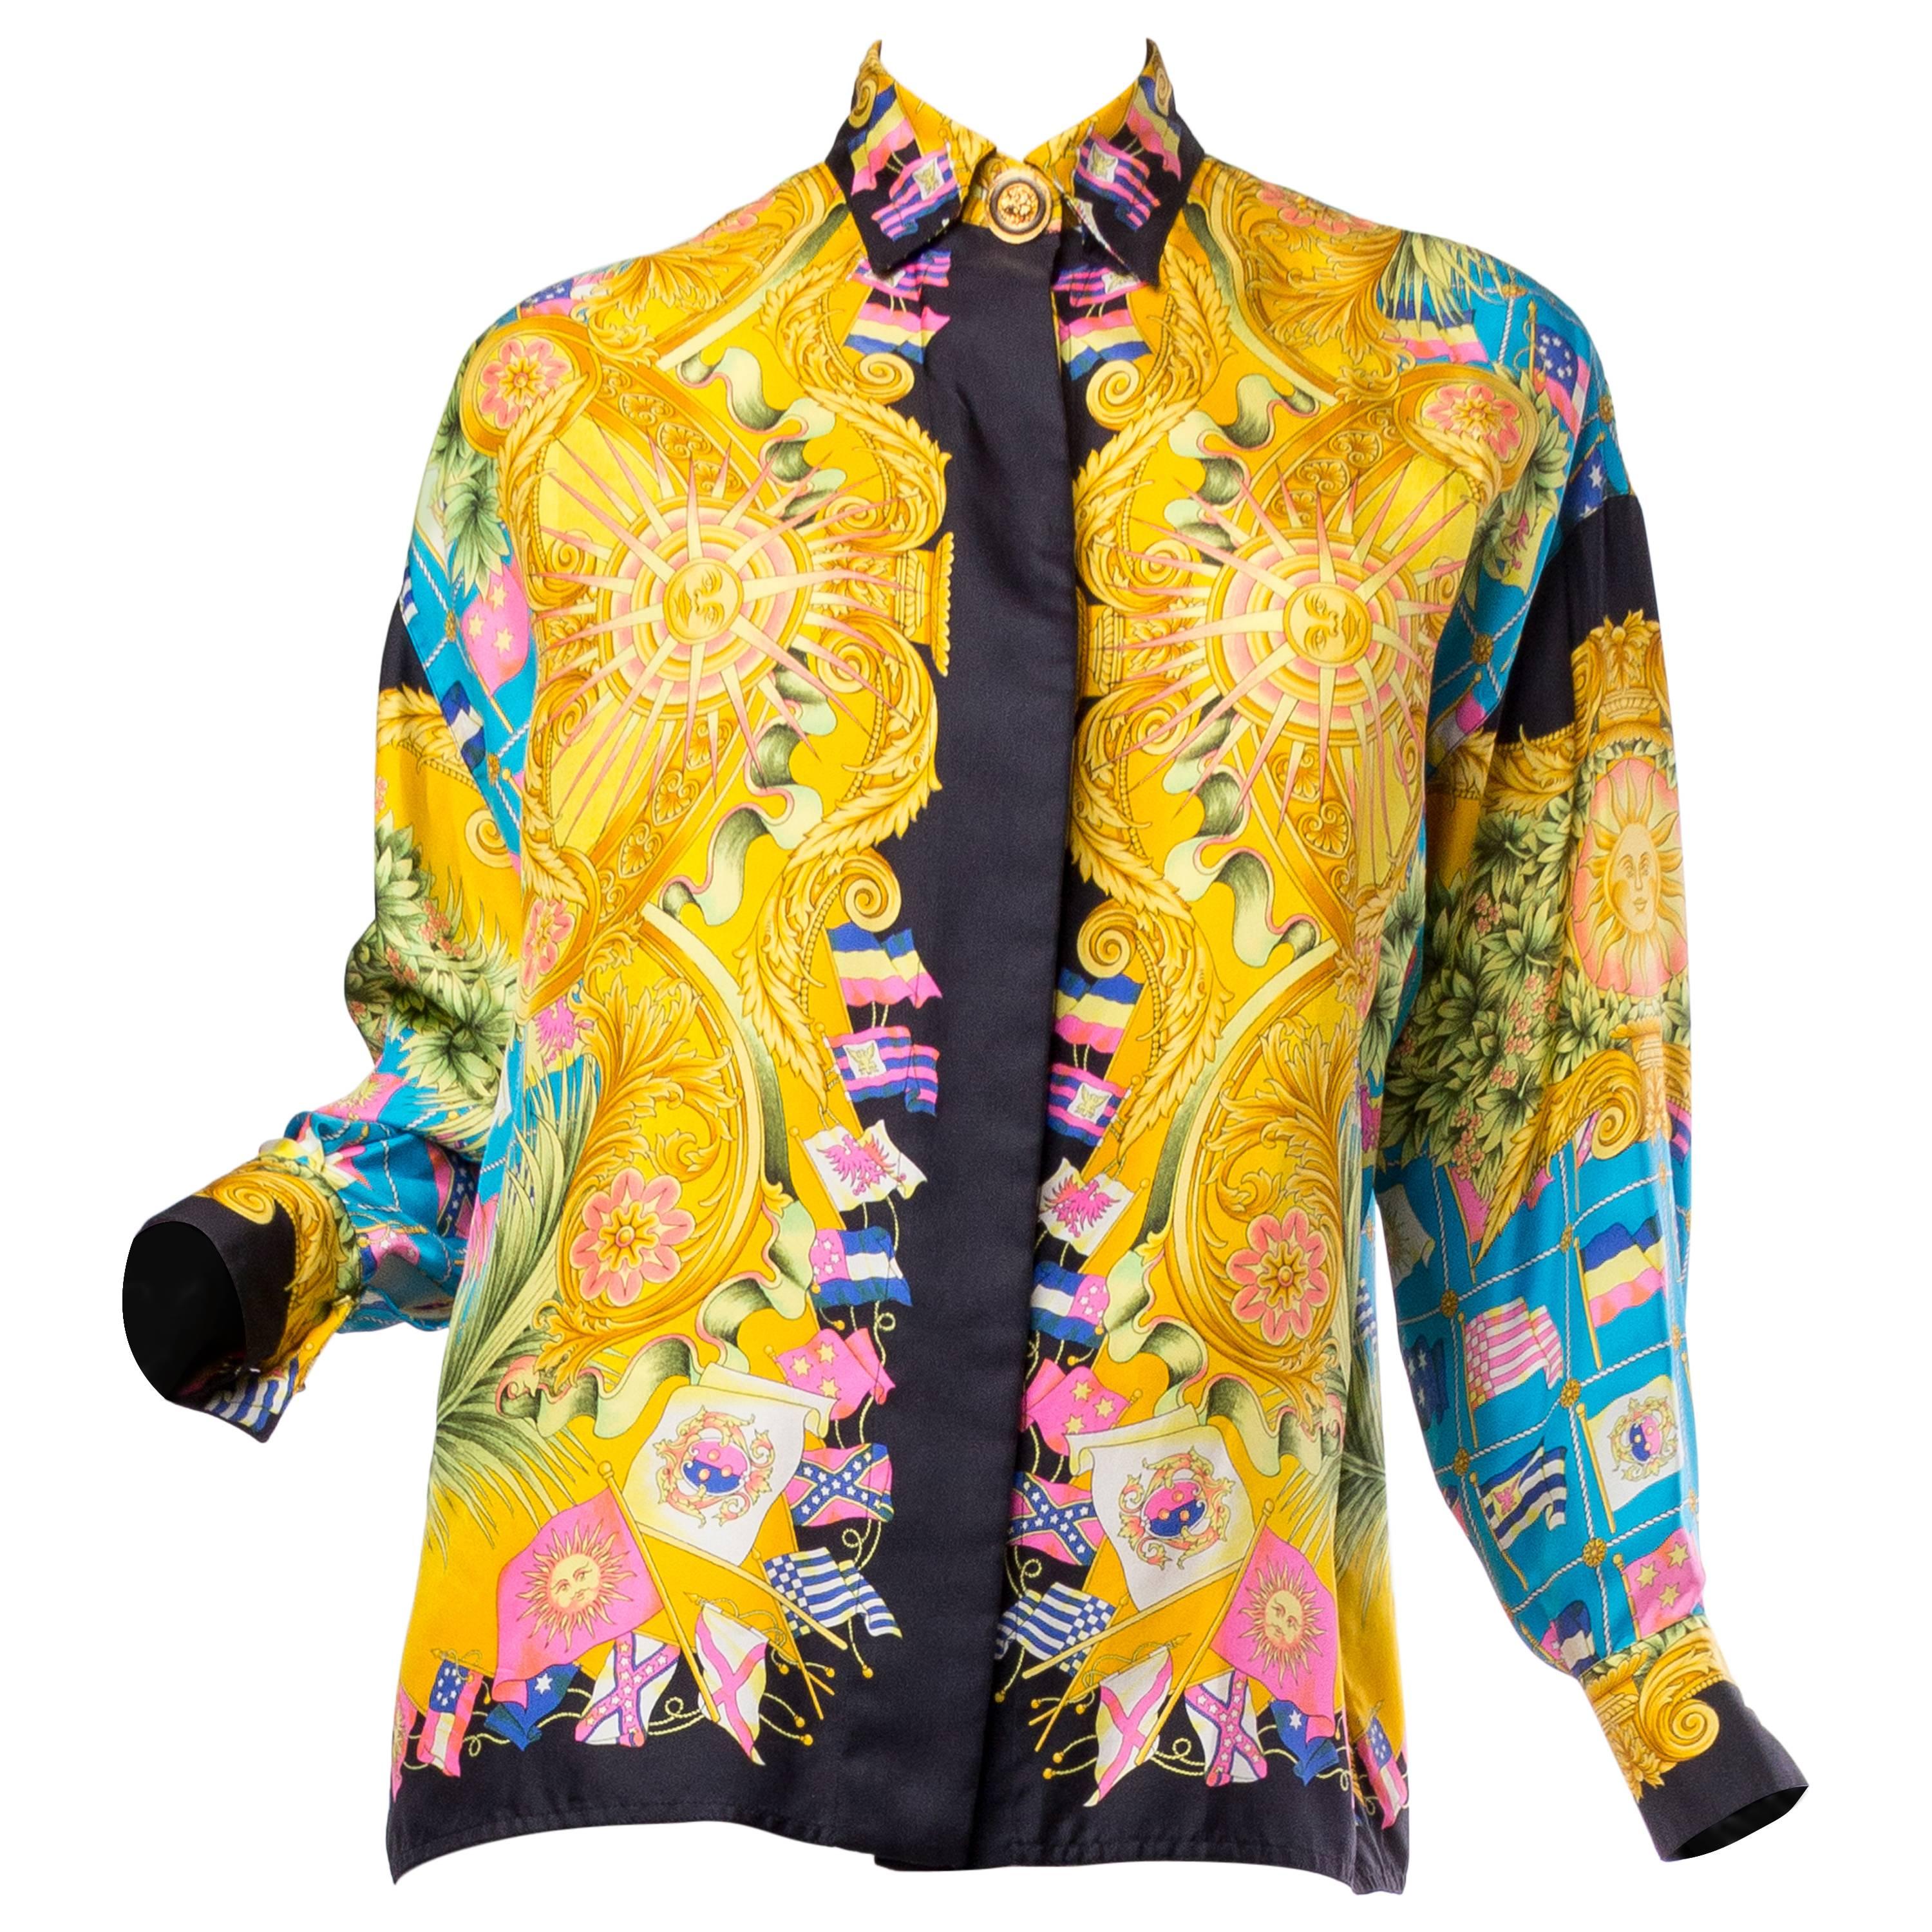 Gianni Versace Couture Women's Printed Silk Blouse